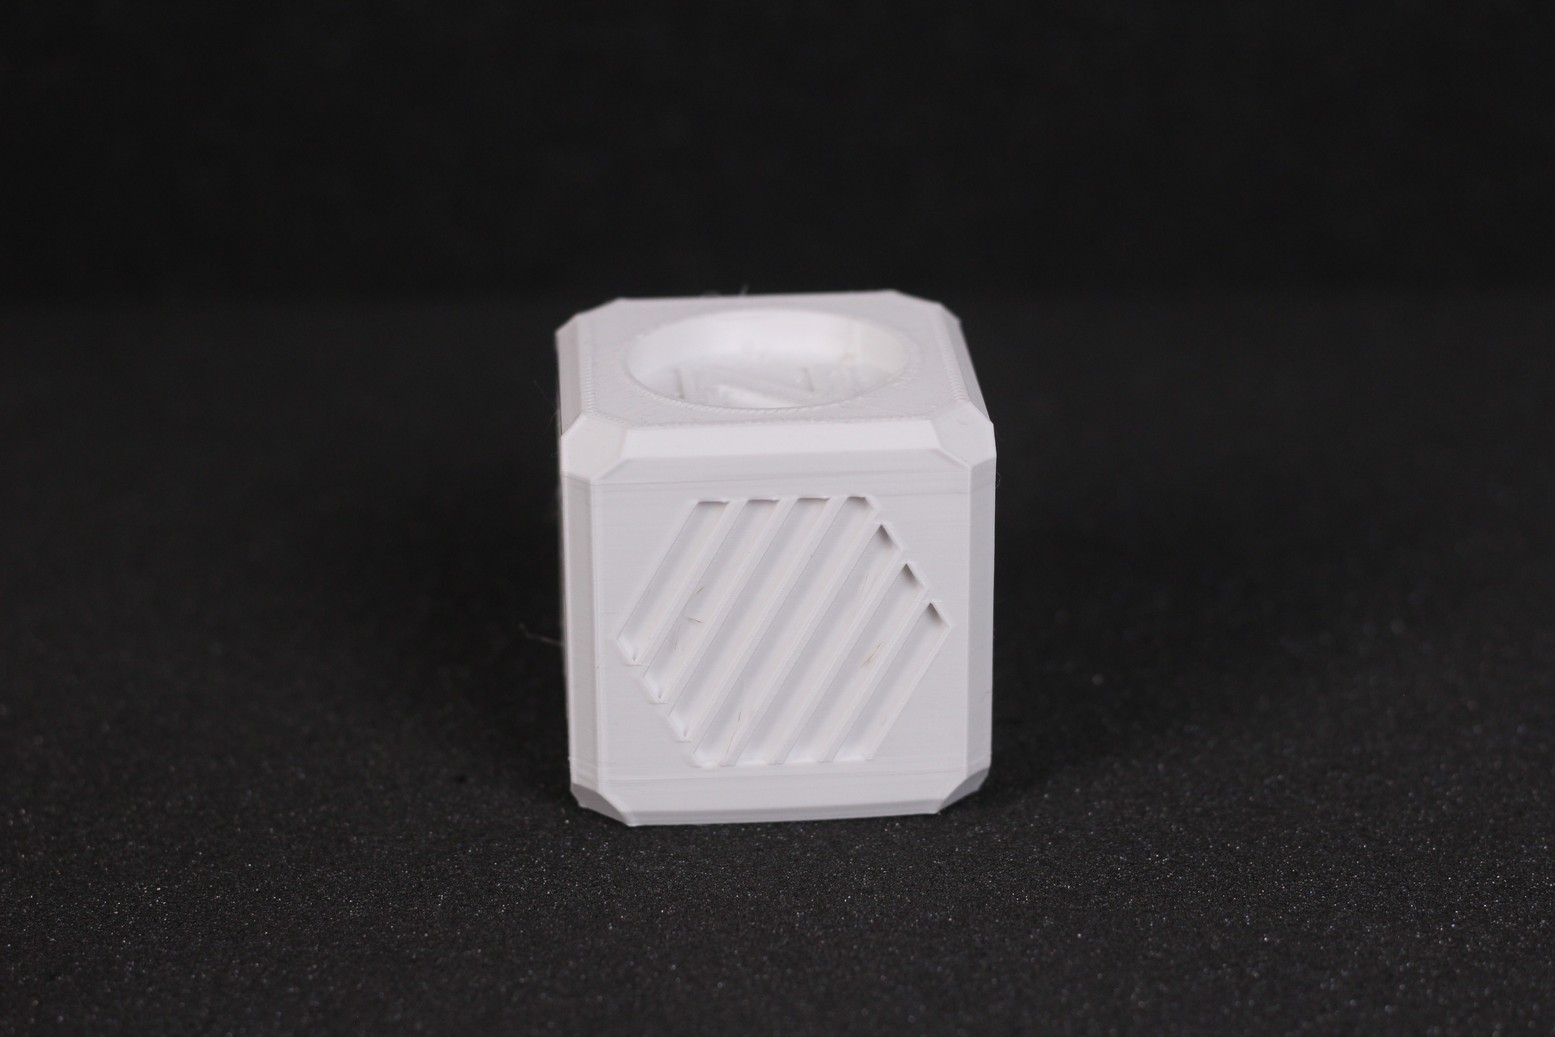 200 Helix Test Cube printed in PETG 3 | Creality Ender 2 Pro Review: Is it worth it?